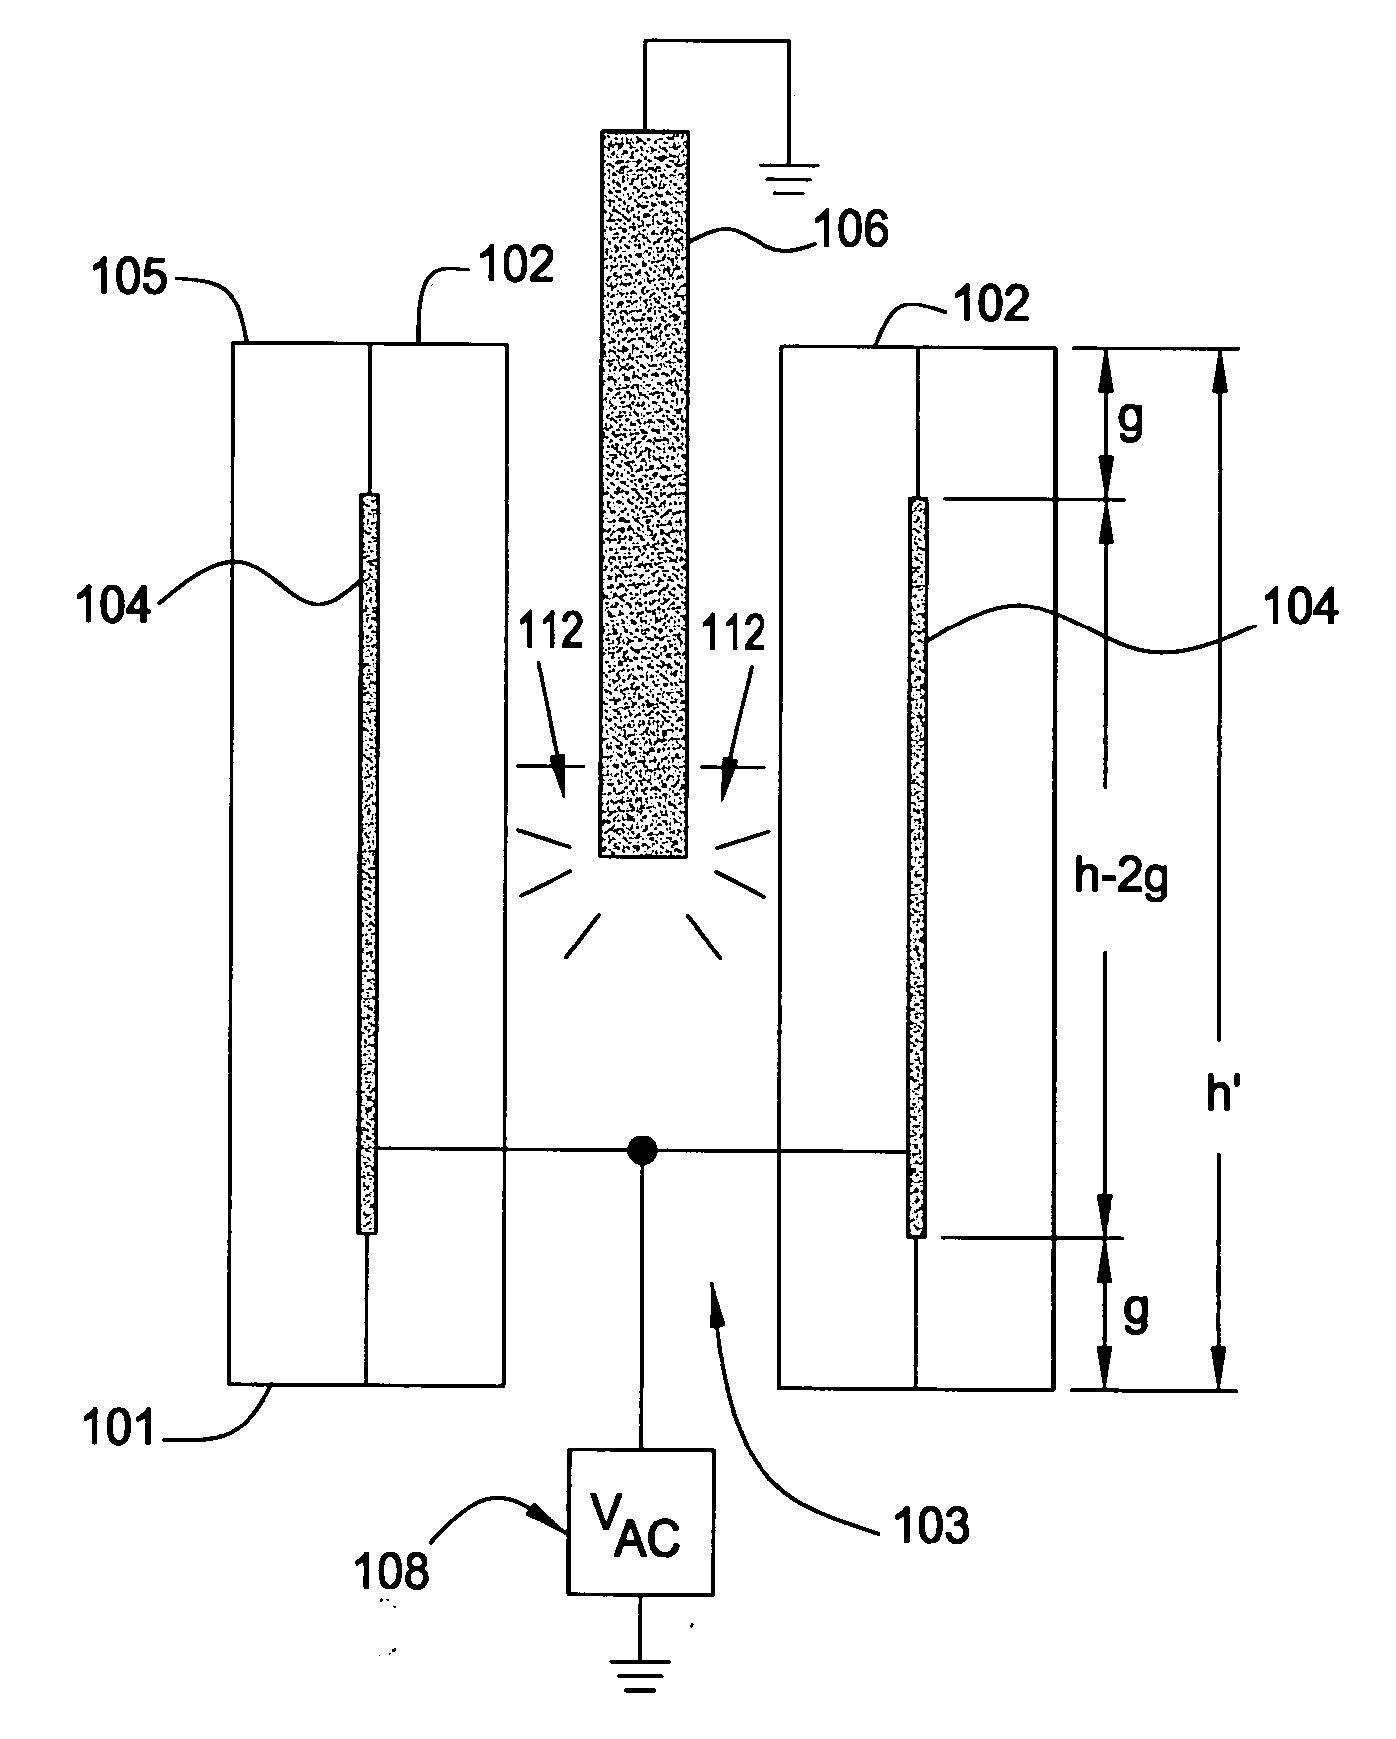 Method and apparatus for cleaning and surface conditioning objects with plasma